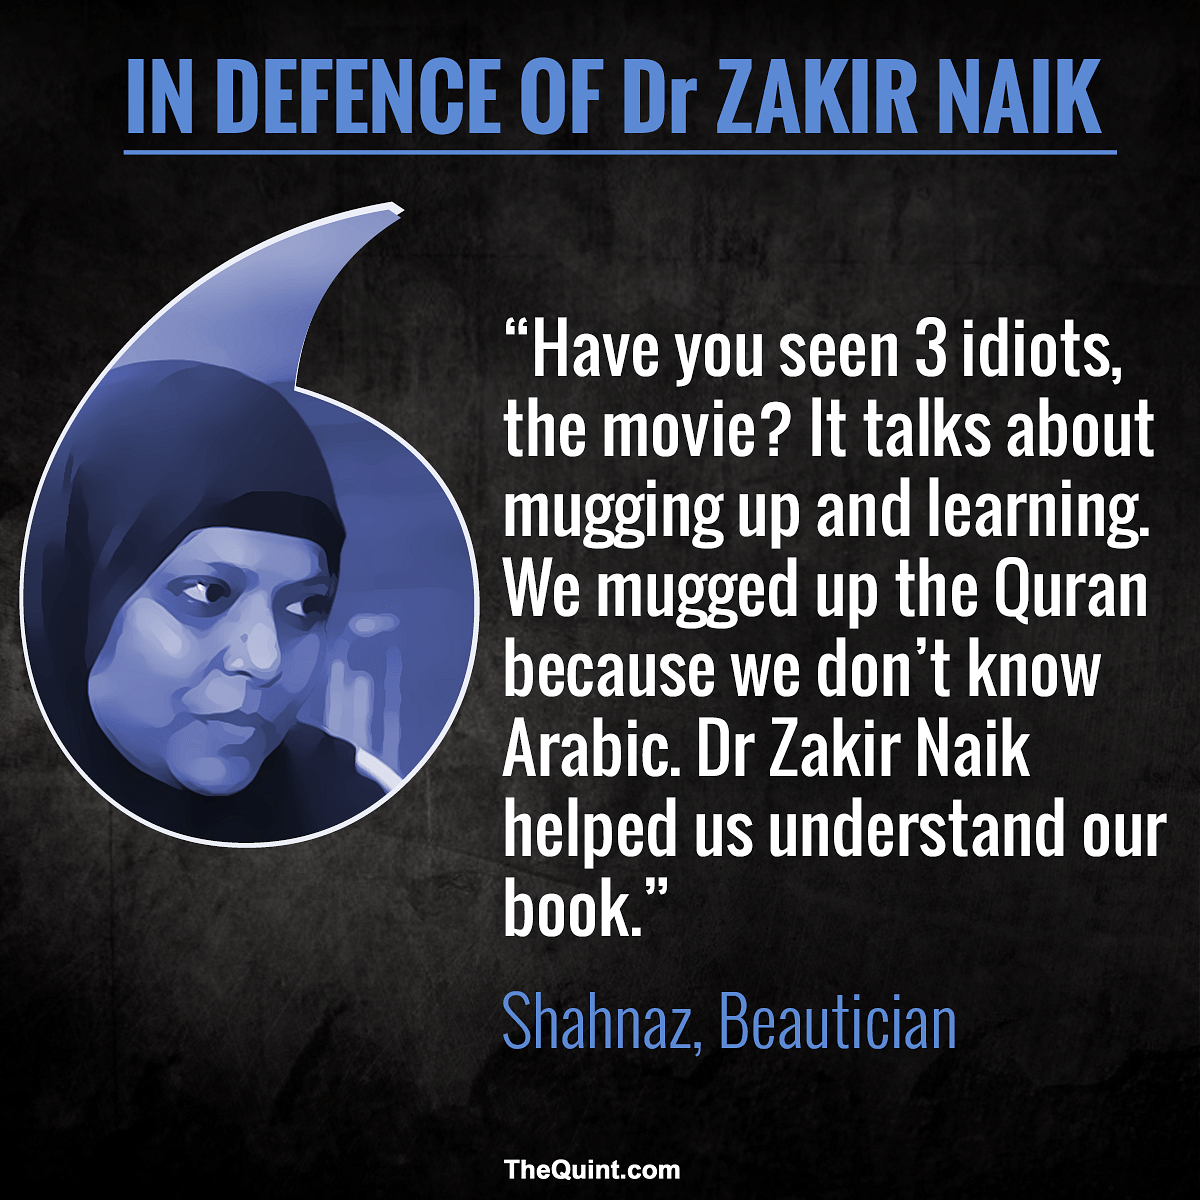 What makes Dr Zakir Naik tick? His young followers help us understand this modern-day preacher of old-world Islam.